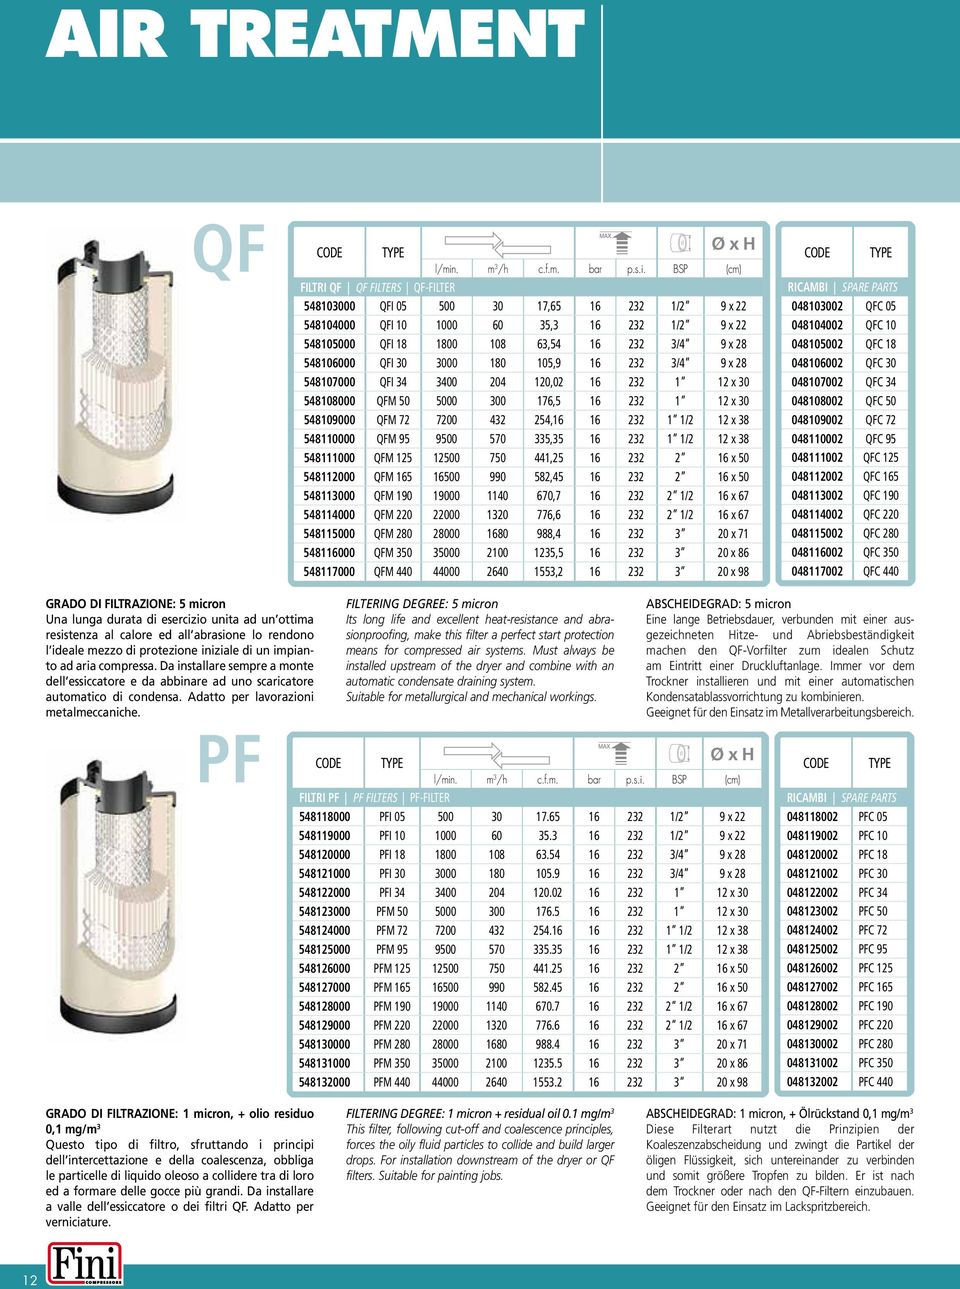 FITERING DEGREE micron Its long life and excellent heat-resistance and abrasionproofing, make this filter a perfect start protection means for compressed air systems.